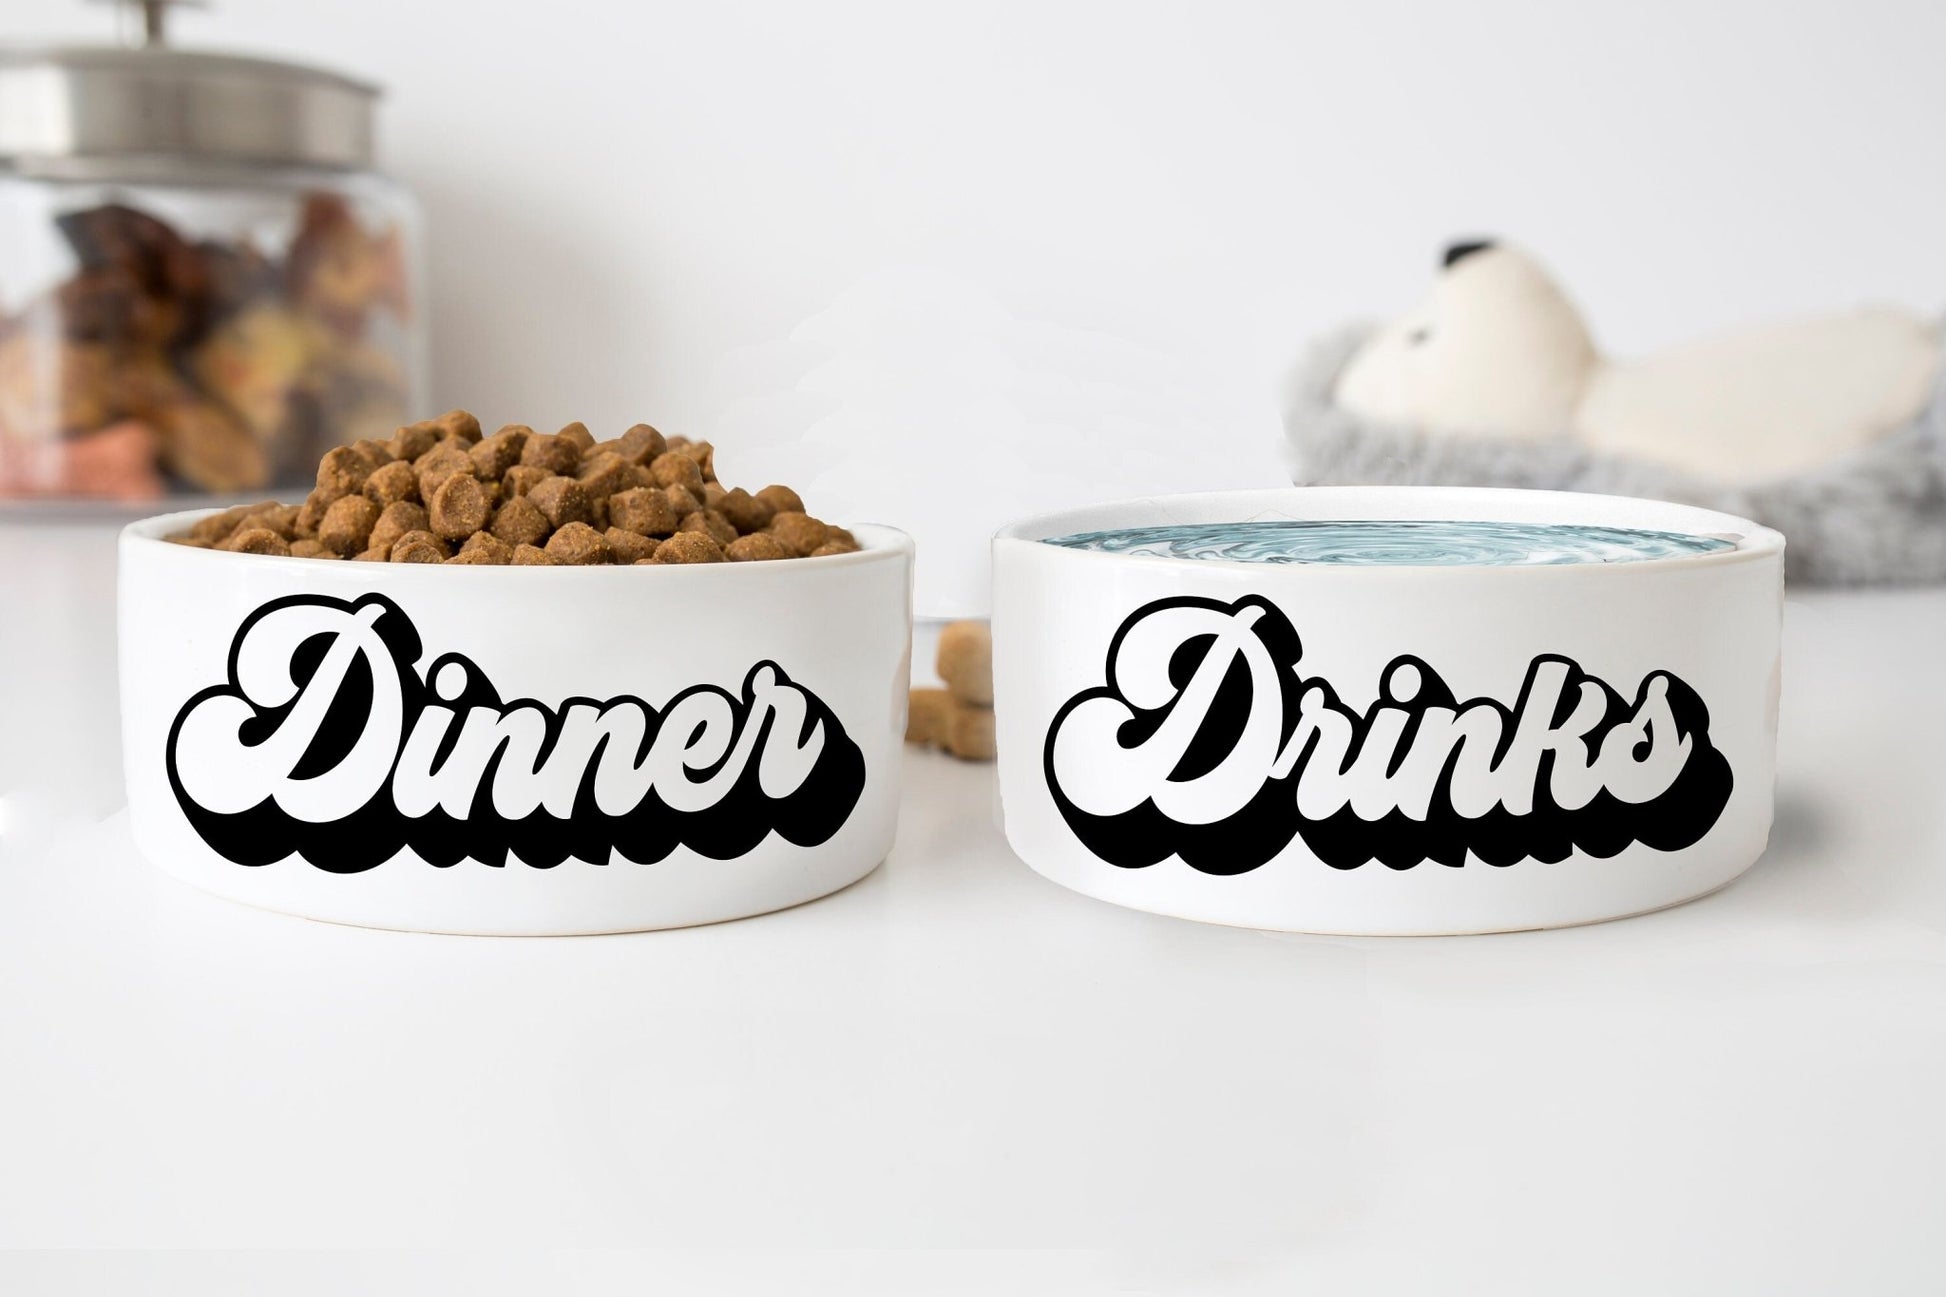 https://squishycheeks.com/cdn/shop/products/retro-dog-bowl-new-dog-gift-funny-dog-gift-pet-food-bowl-water-bowl-cat-bowls-dinner-drinks-personalized-dog-bowl-ceramic-6-or-7-white-1-961341.jpg?v=1674180062&width=1946